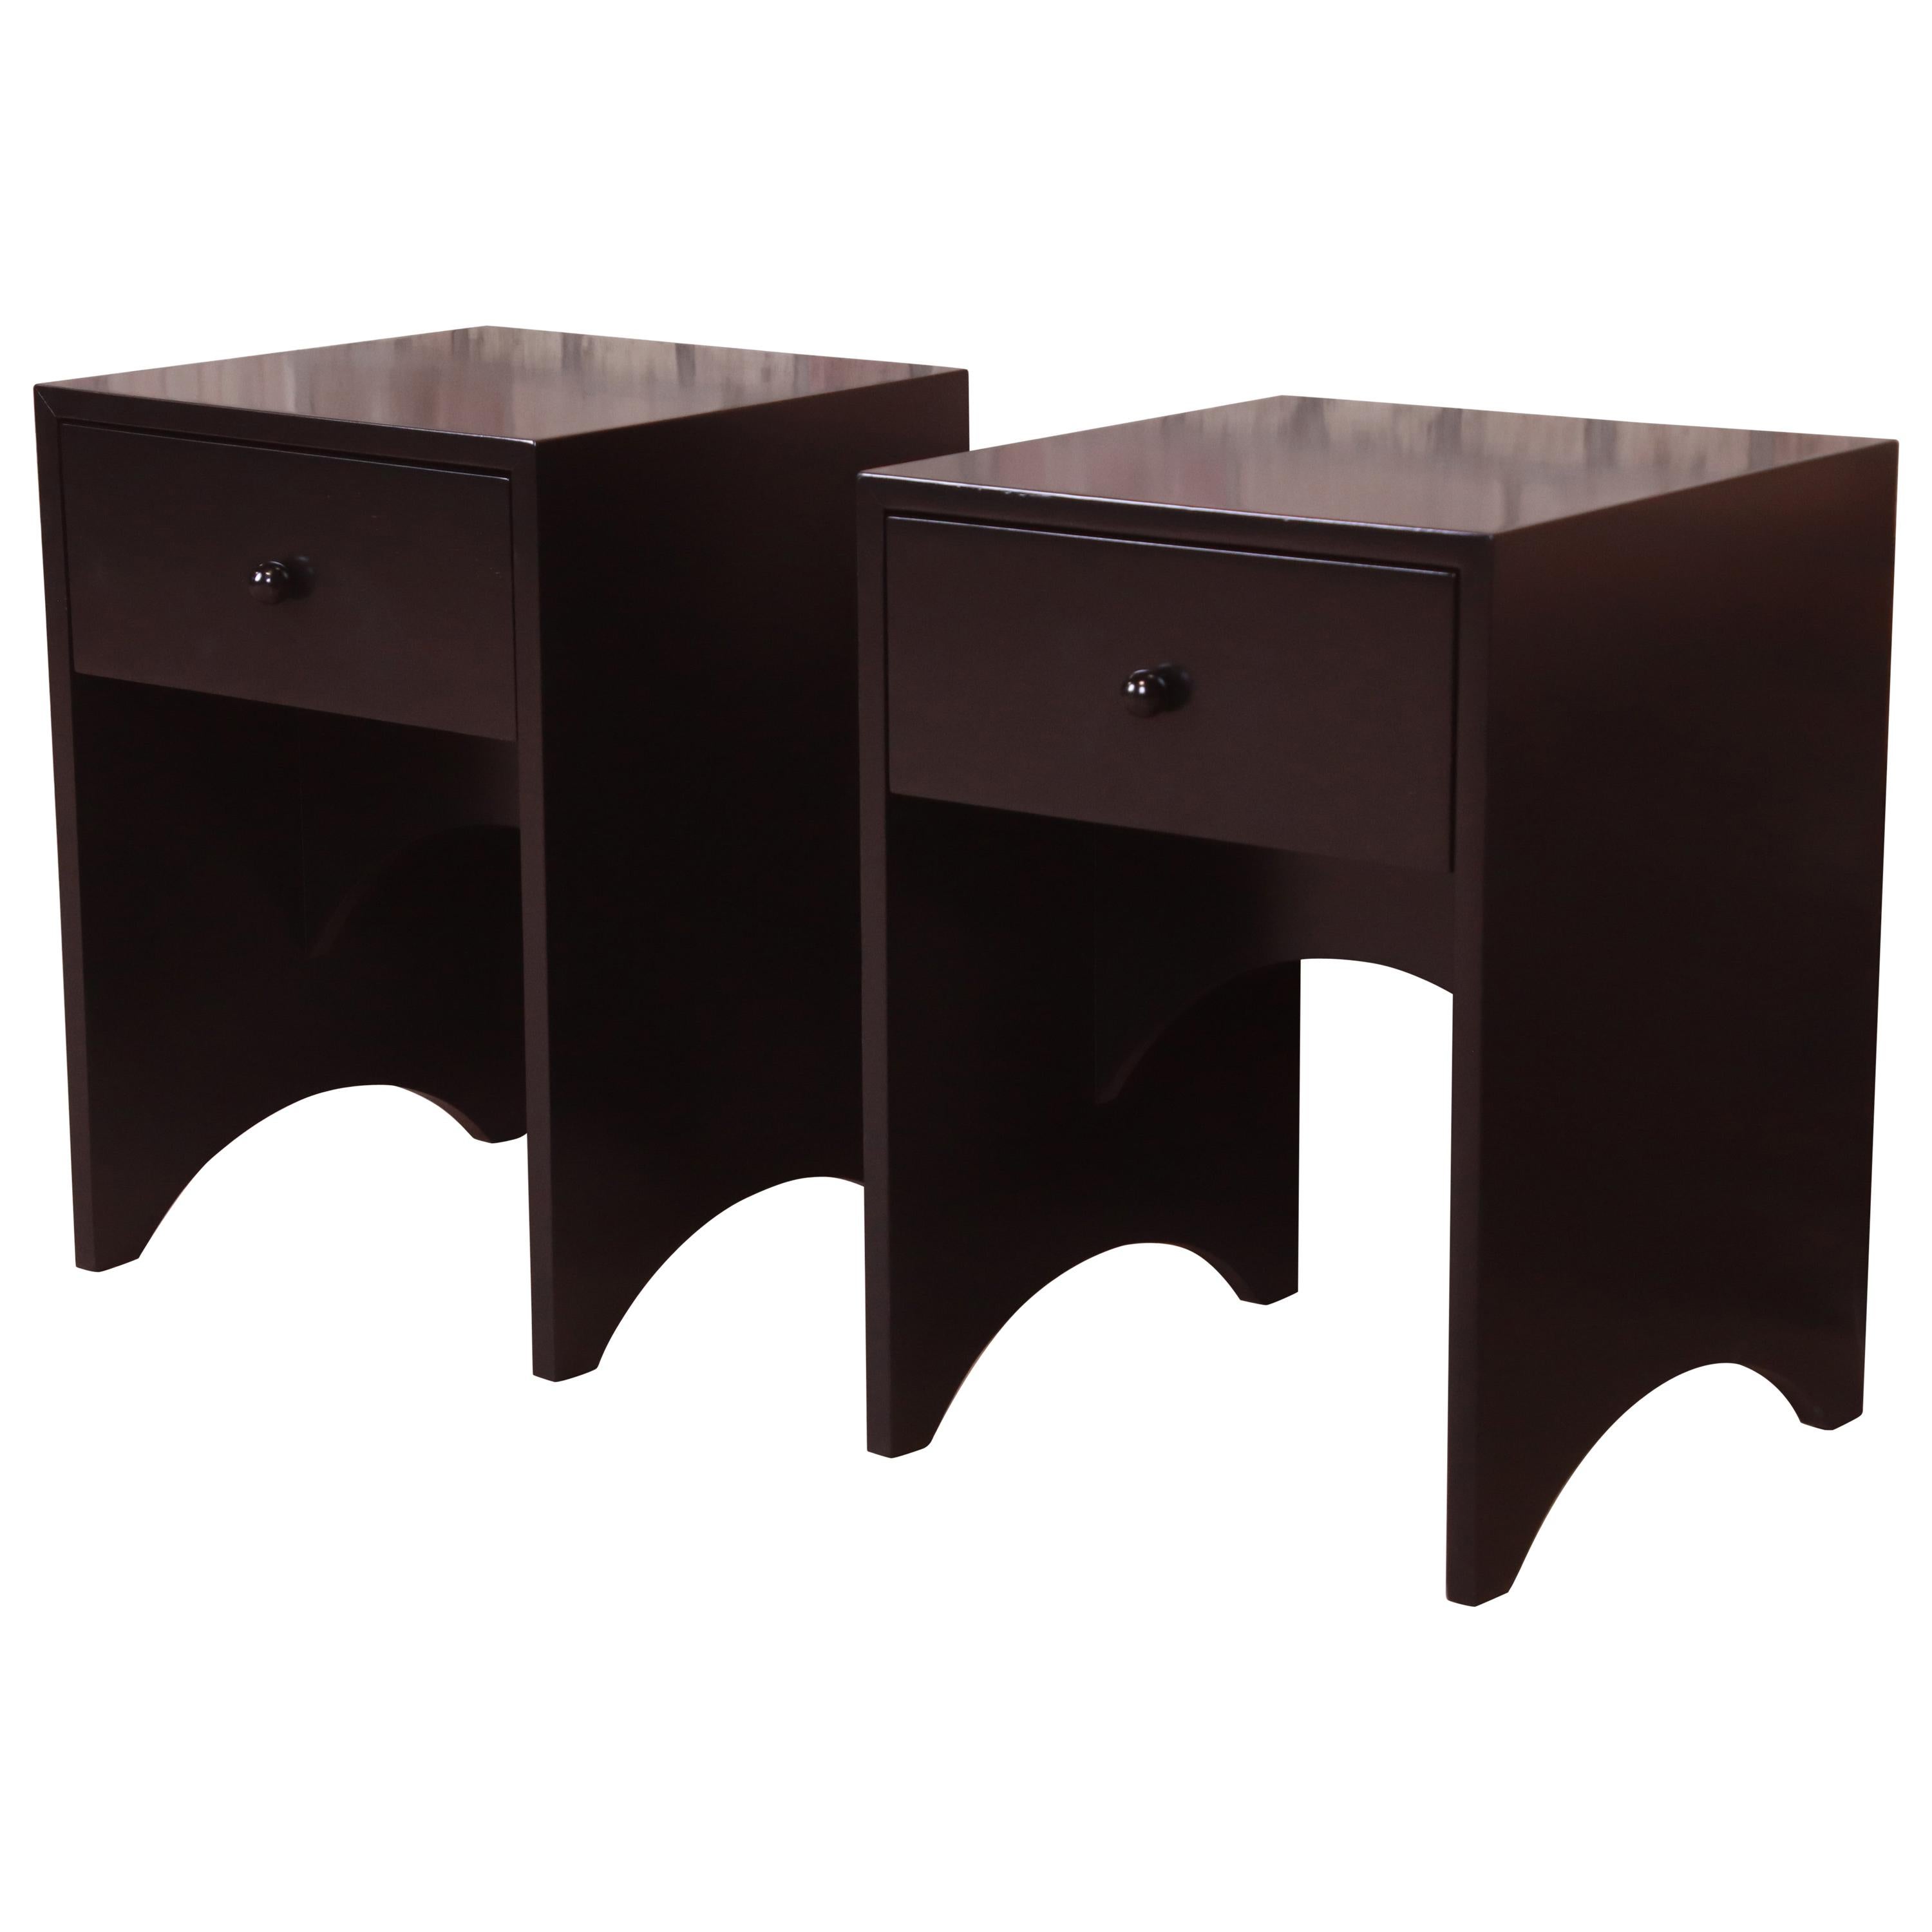 Sergio Savarese for Dialogica Modern Black Lacquered Nightstands, Refinished